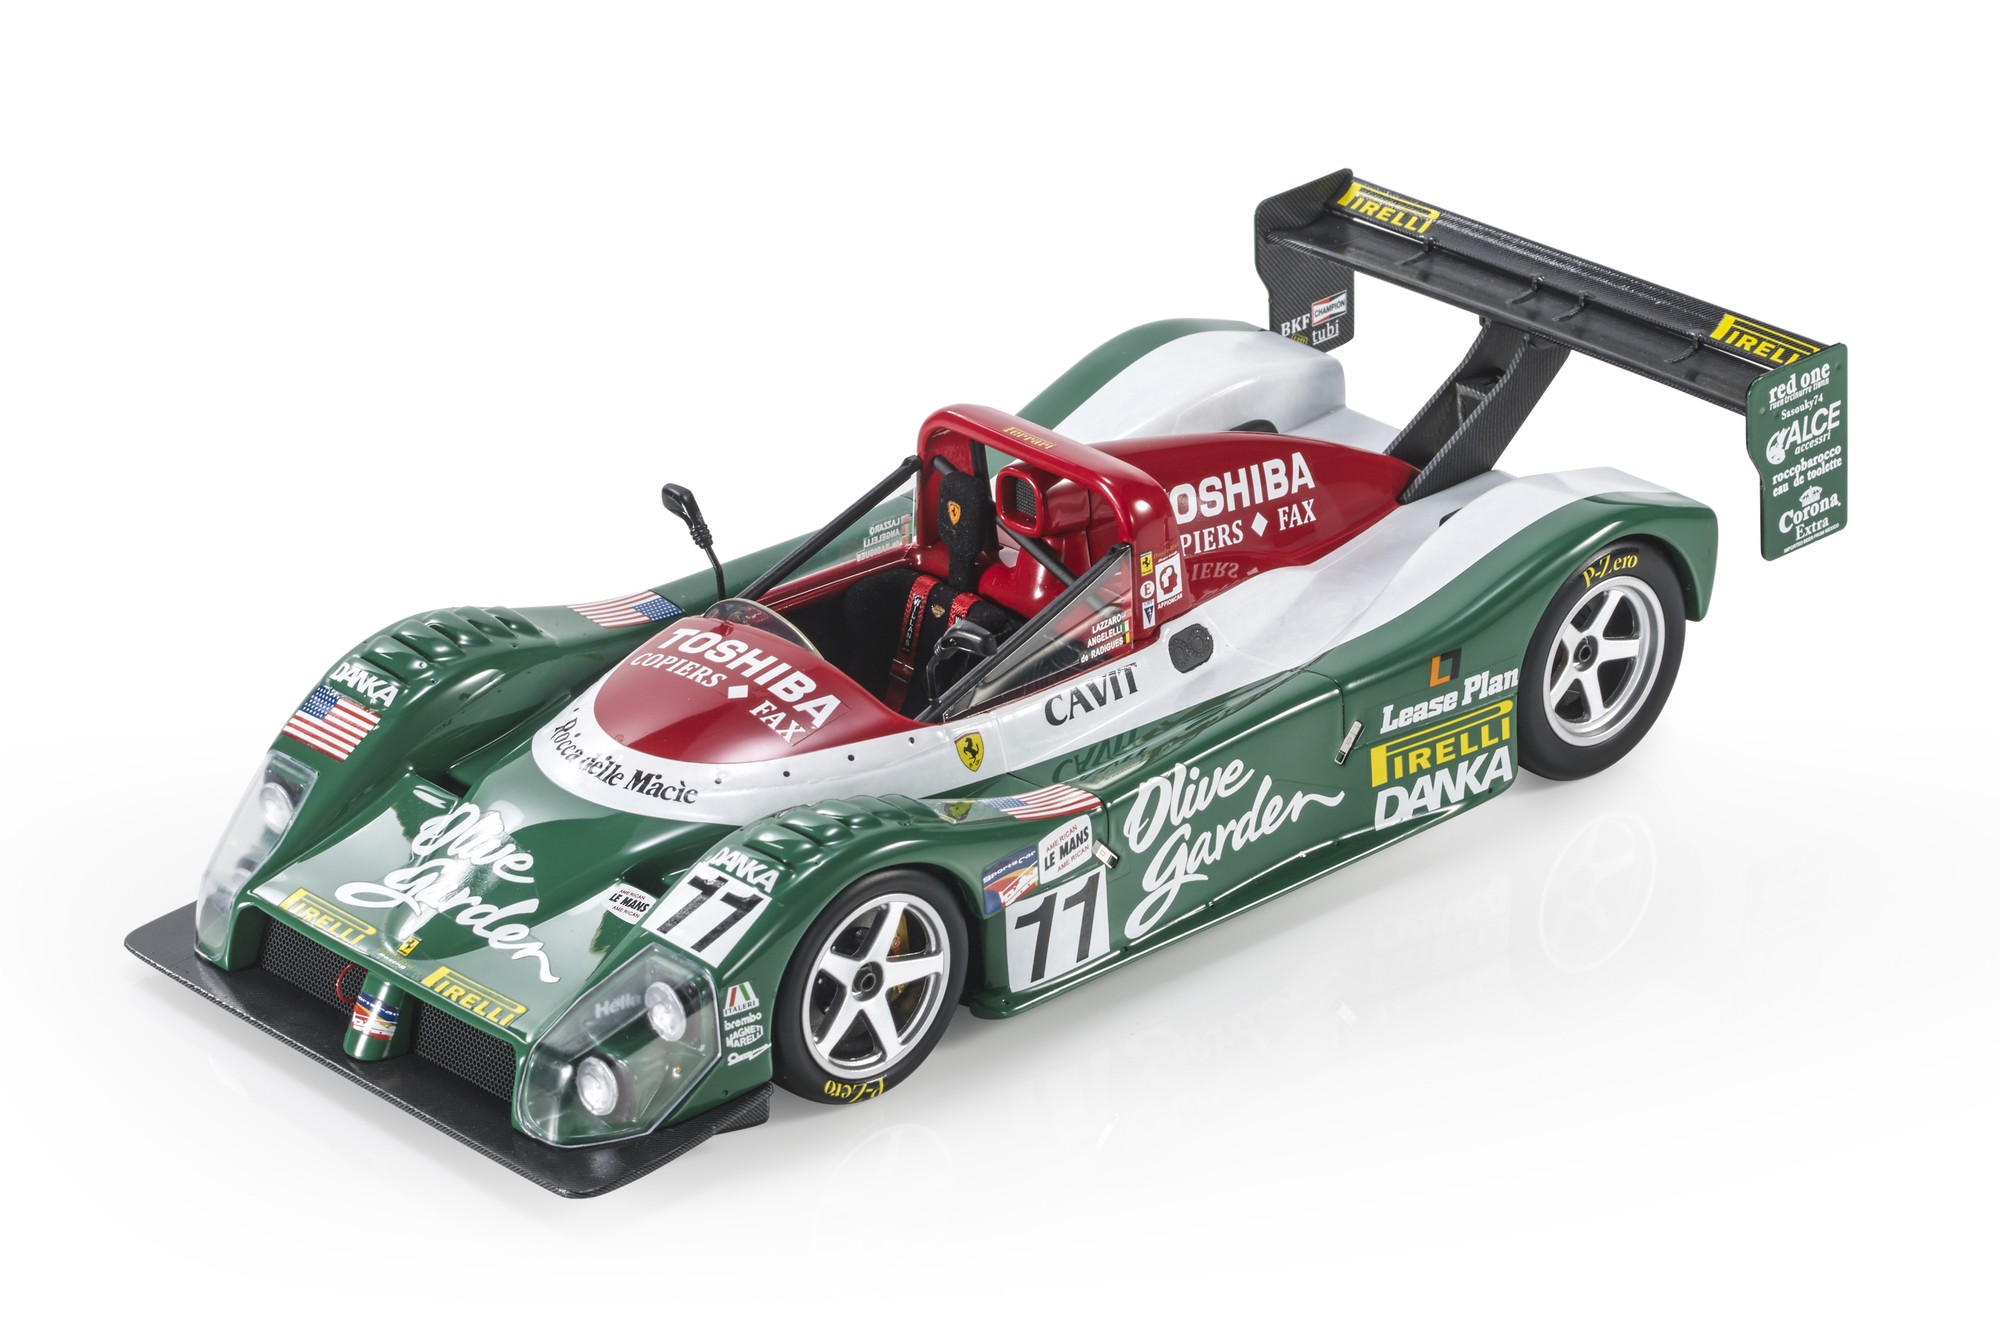 Top Marques MOMO ライセンス商品 Top Marques トップマルケス 1/18 ミニカー レジン・プロポーションモデル 1999年セブリング１２時間 フェラーリ FERRARI - F333SP 4.0L V12 F310E TEAM DOYLE-RISI RACING OLIVE GARDEN N 11 12h SEBRING 1999 A.LAZZARO - M.ANGELELLI - D.DE RADIGUES